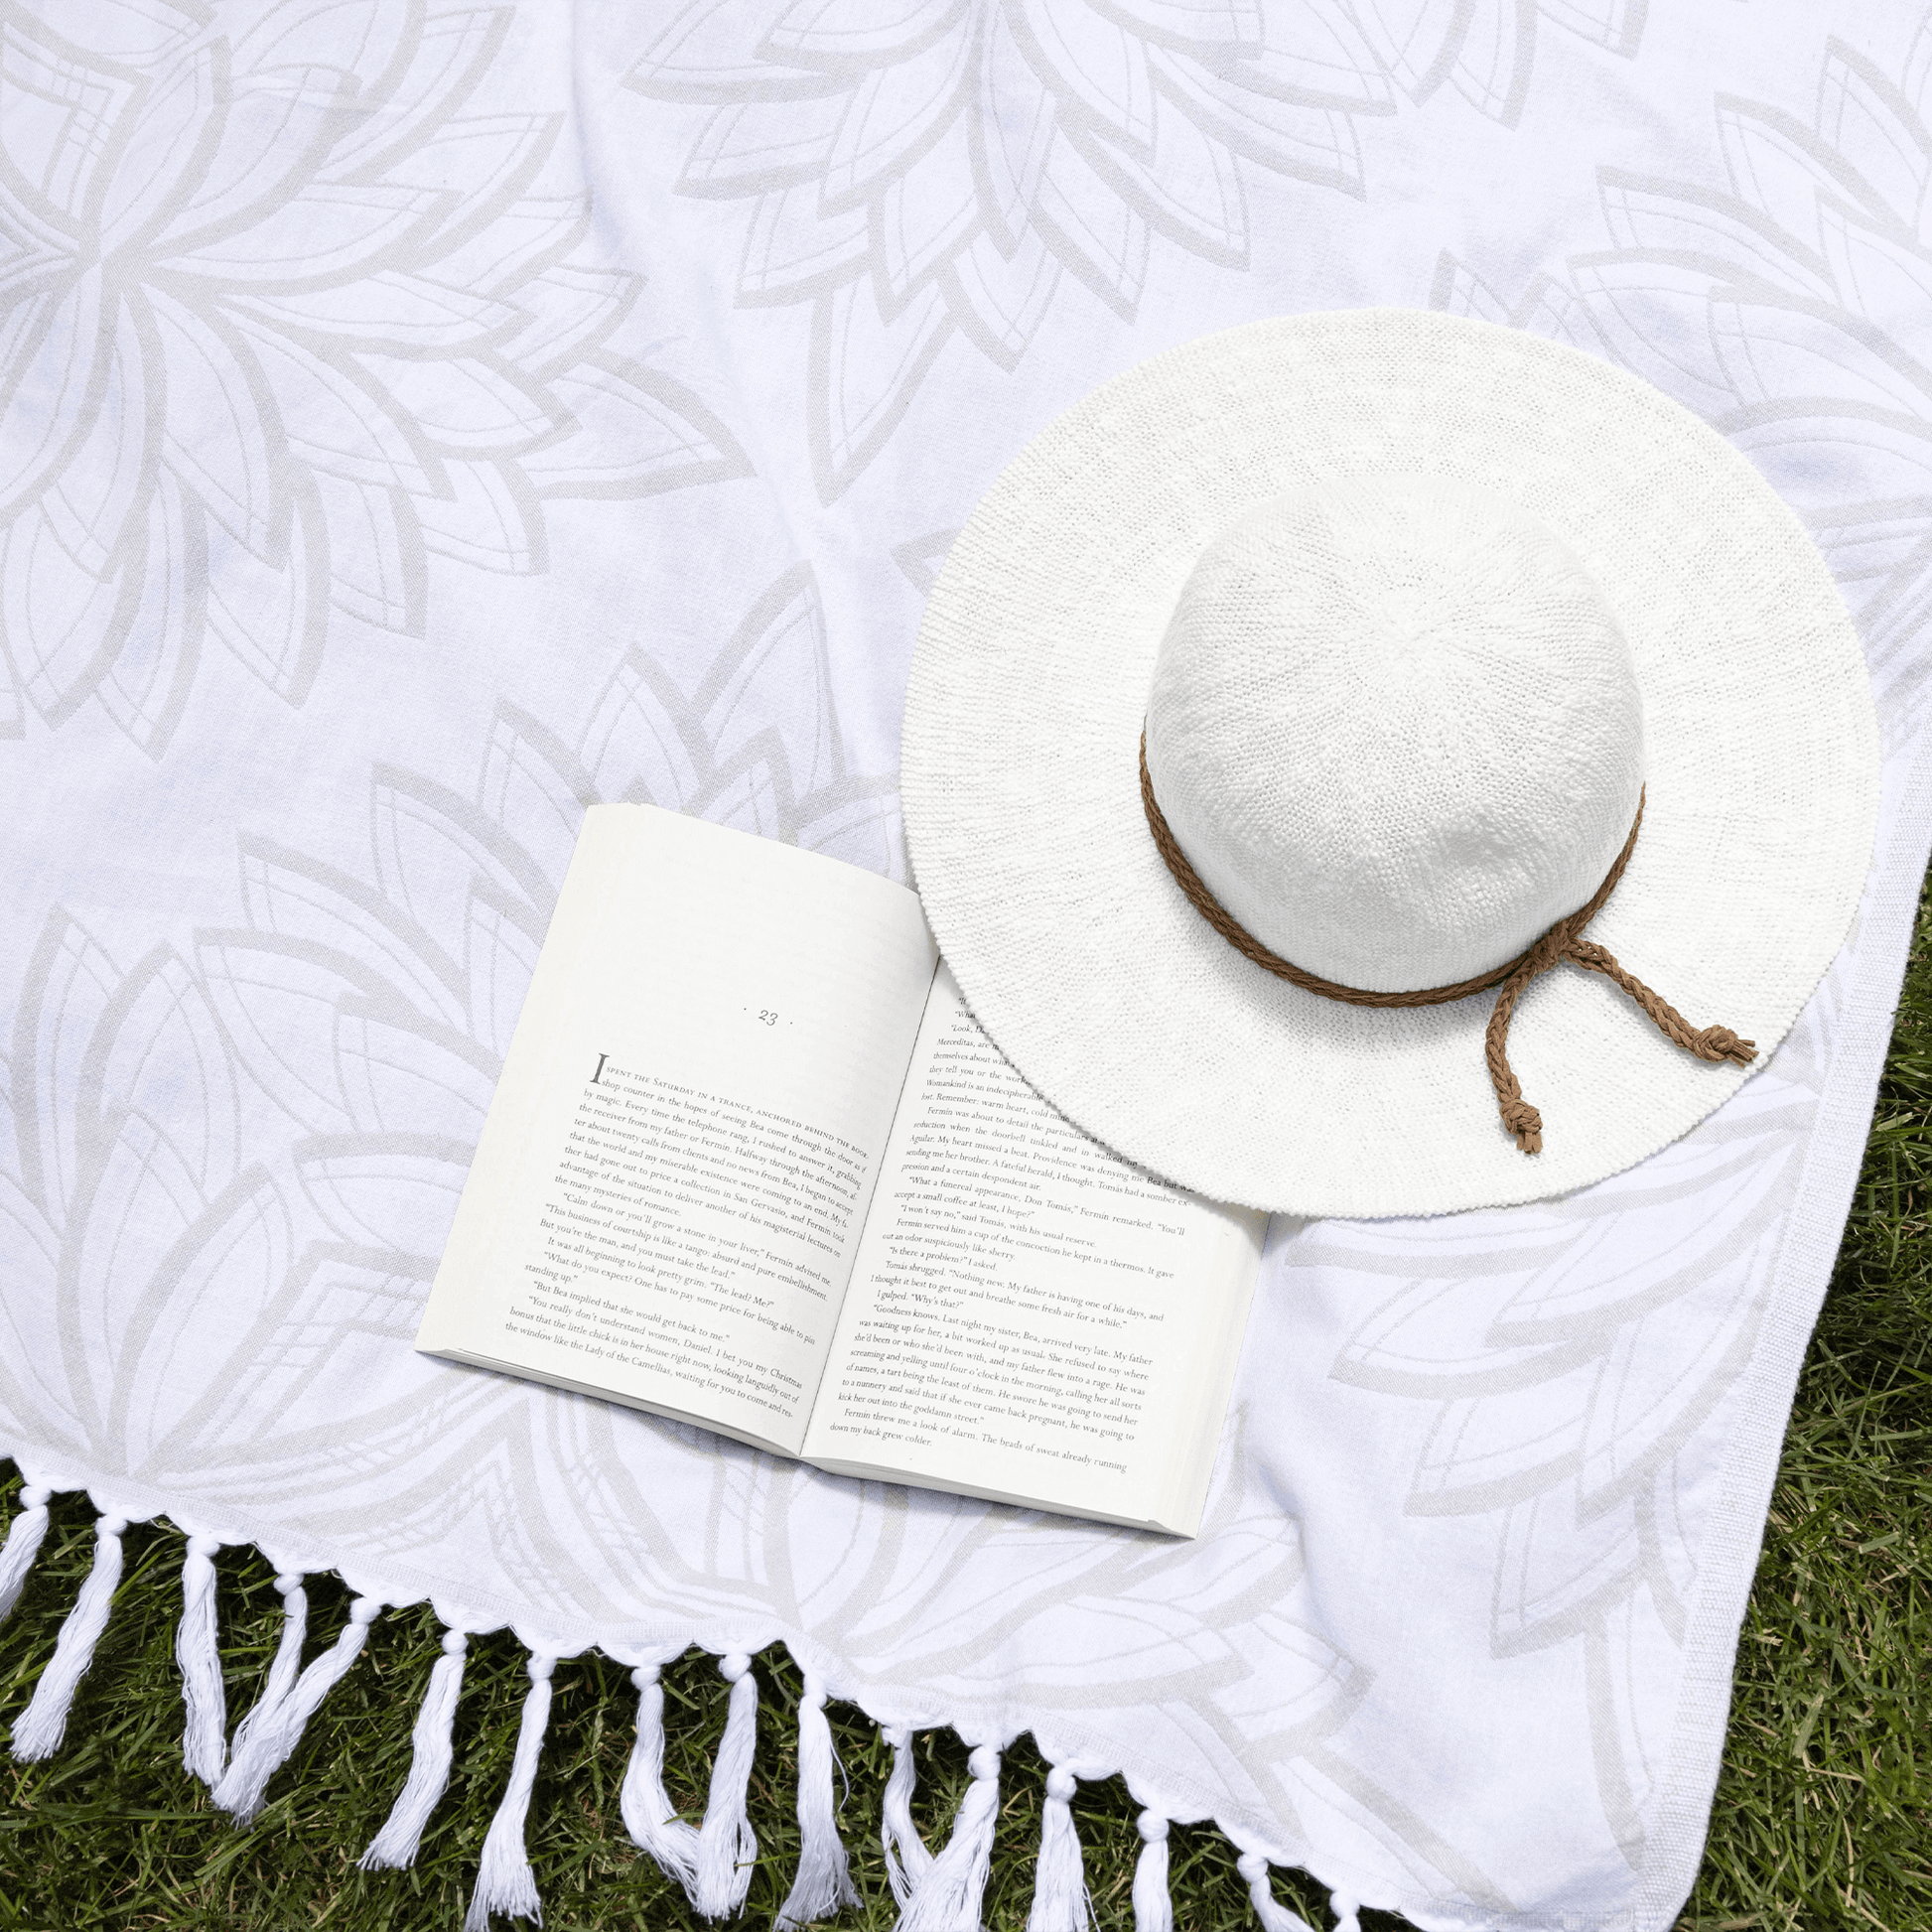 Grey and white Turkish towel on grass with a hat and book in the summer